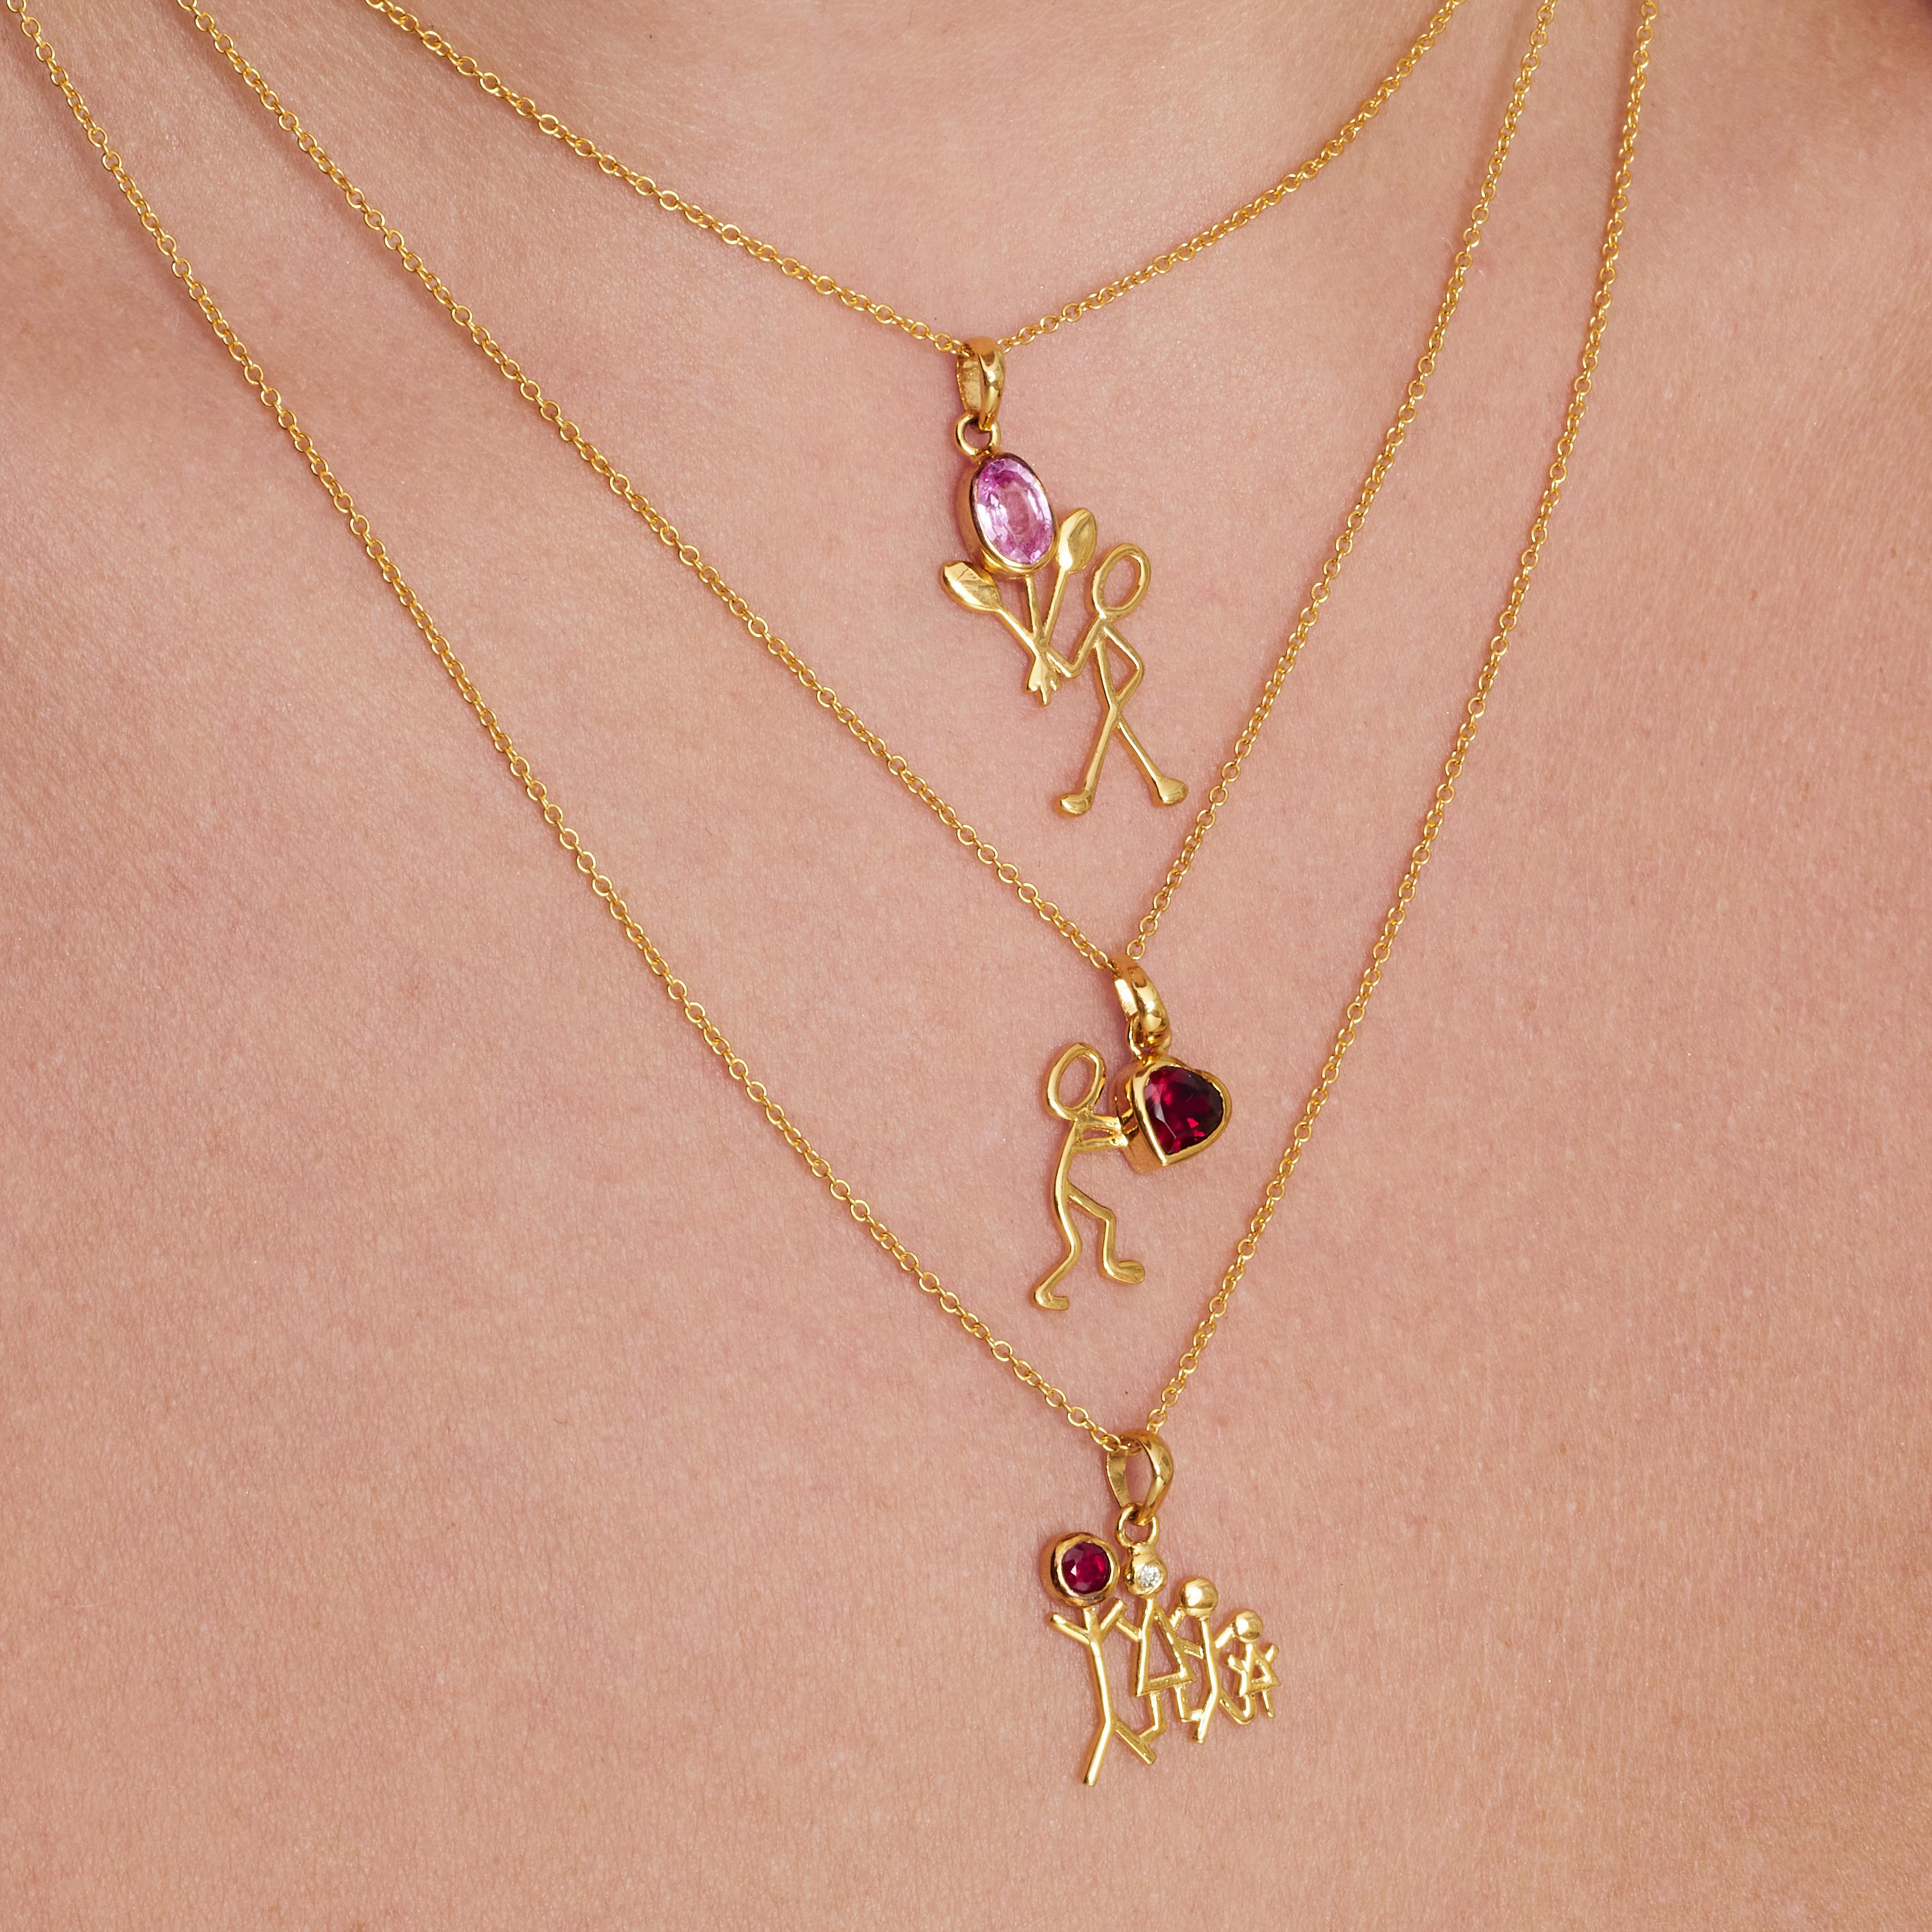 0.10 Carat Ruby Diamond Yellow Gold Family Stick Figure Pendant Necklace In New Condition For Sale In Woodstock, GA